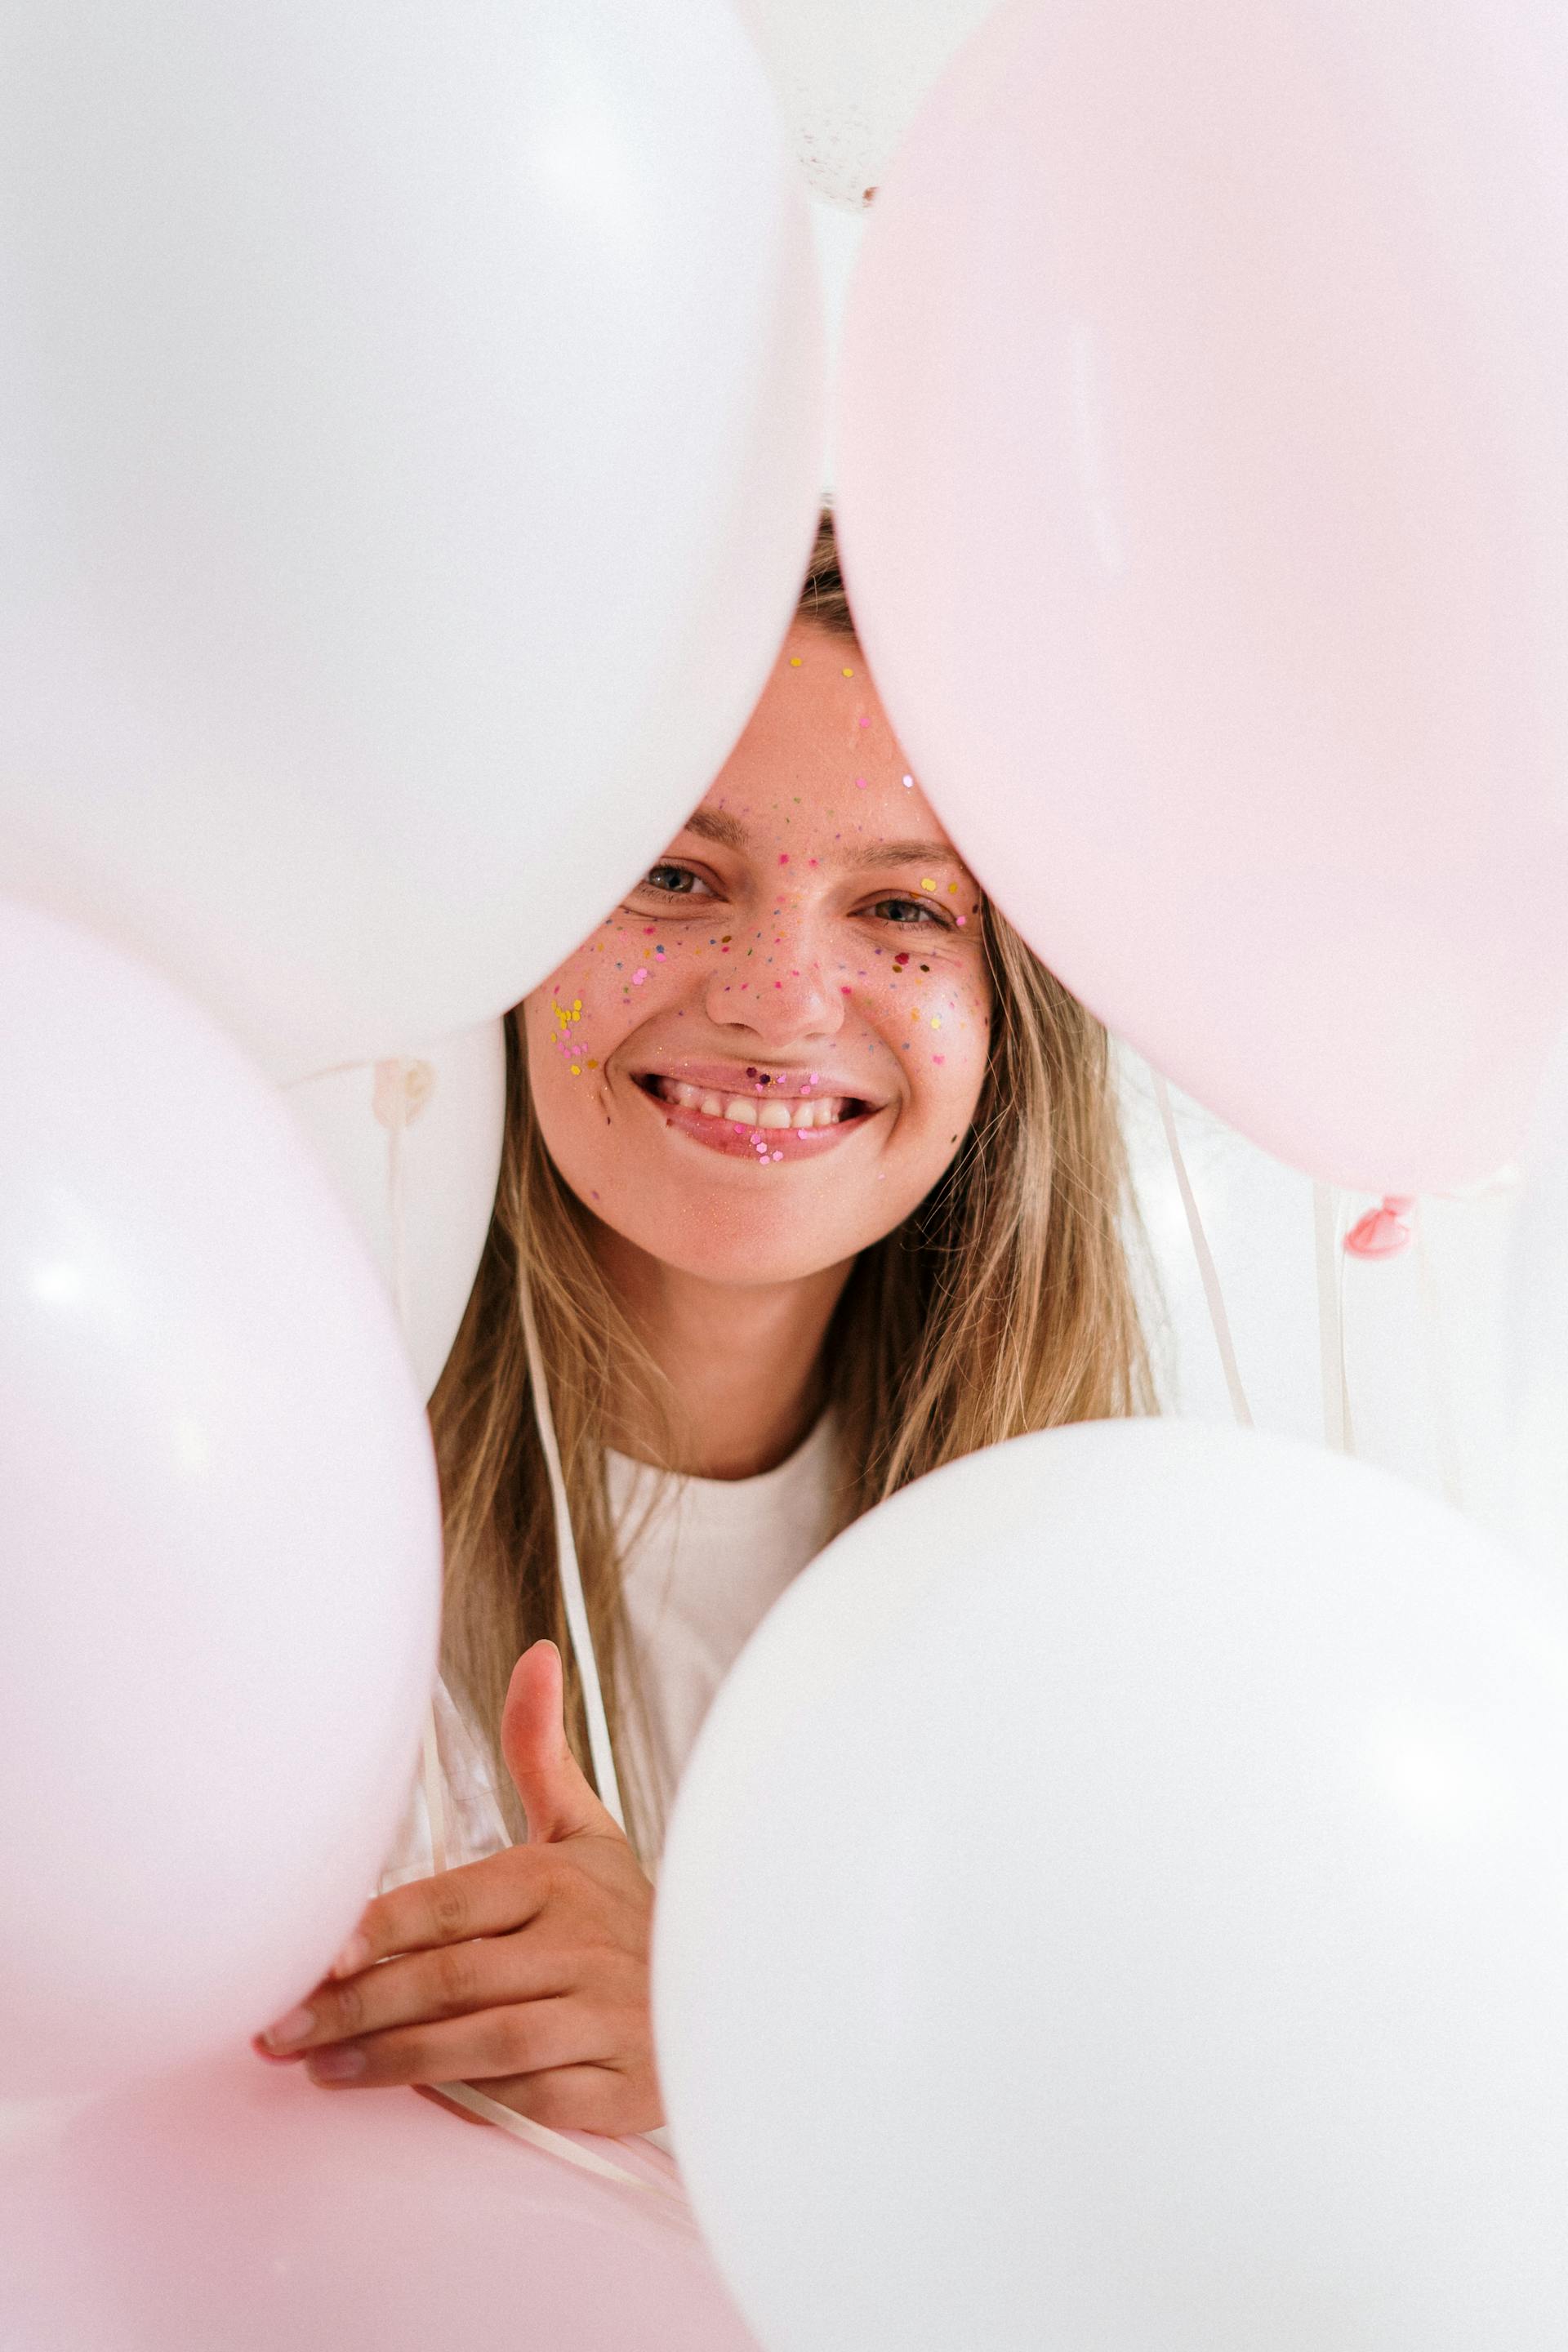 A smiling young girl holding pink and white balloons | Source: Pexels